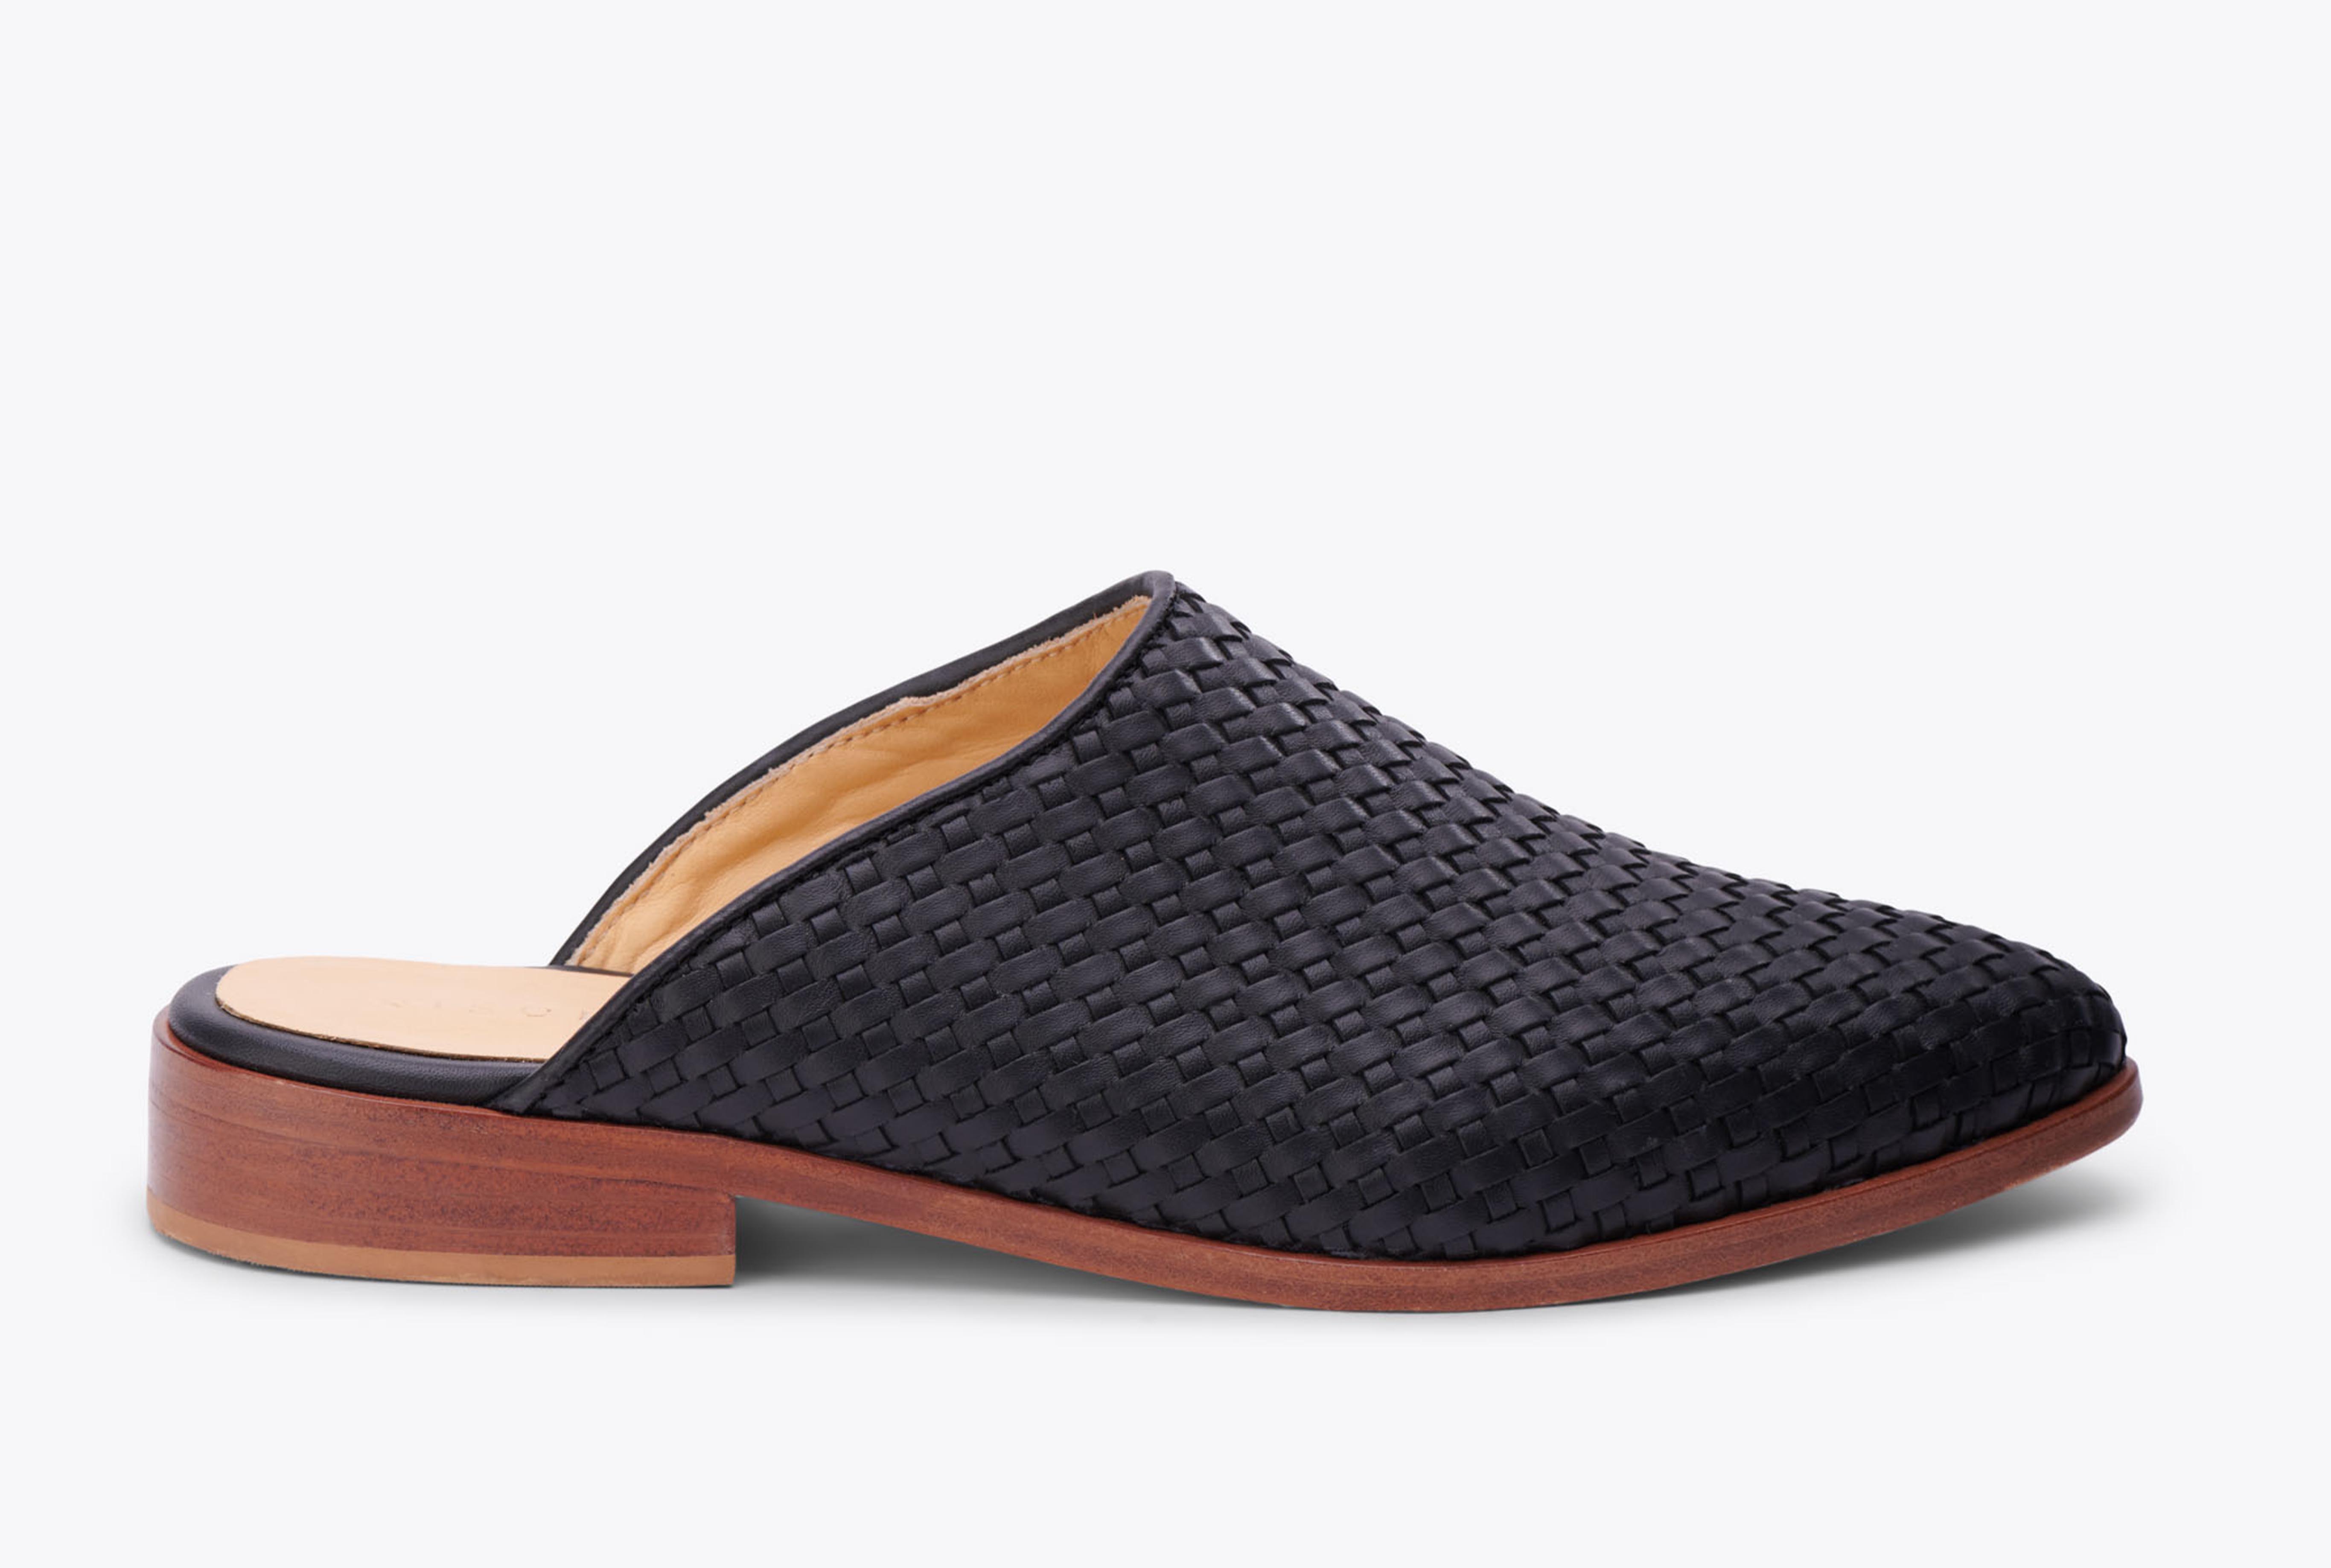 Nisolo Ama Woven Mule Woven Black - Every Nisolo product is built on the foundation of comfort, function, and design. 